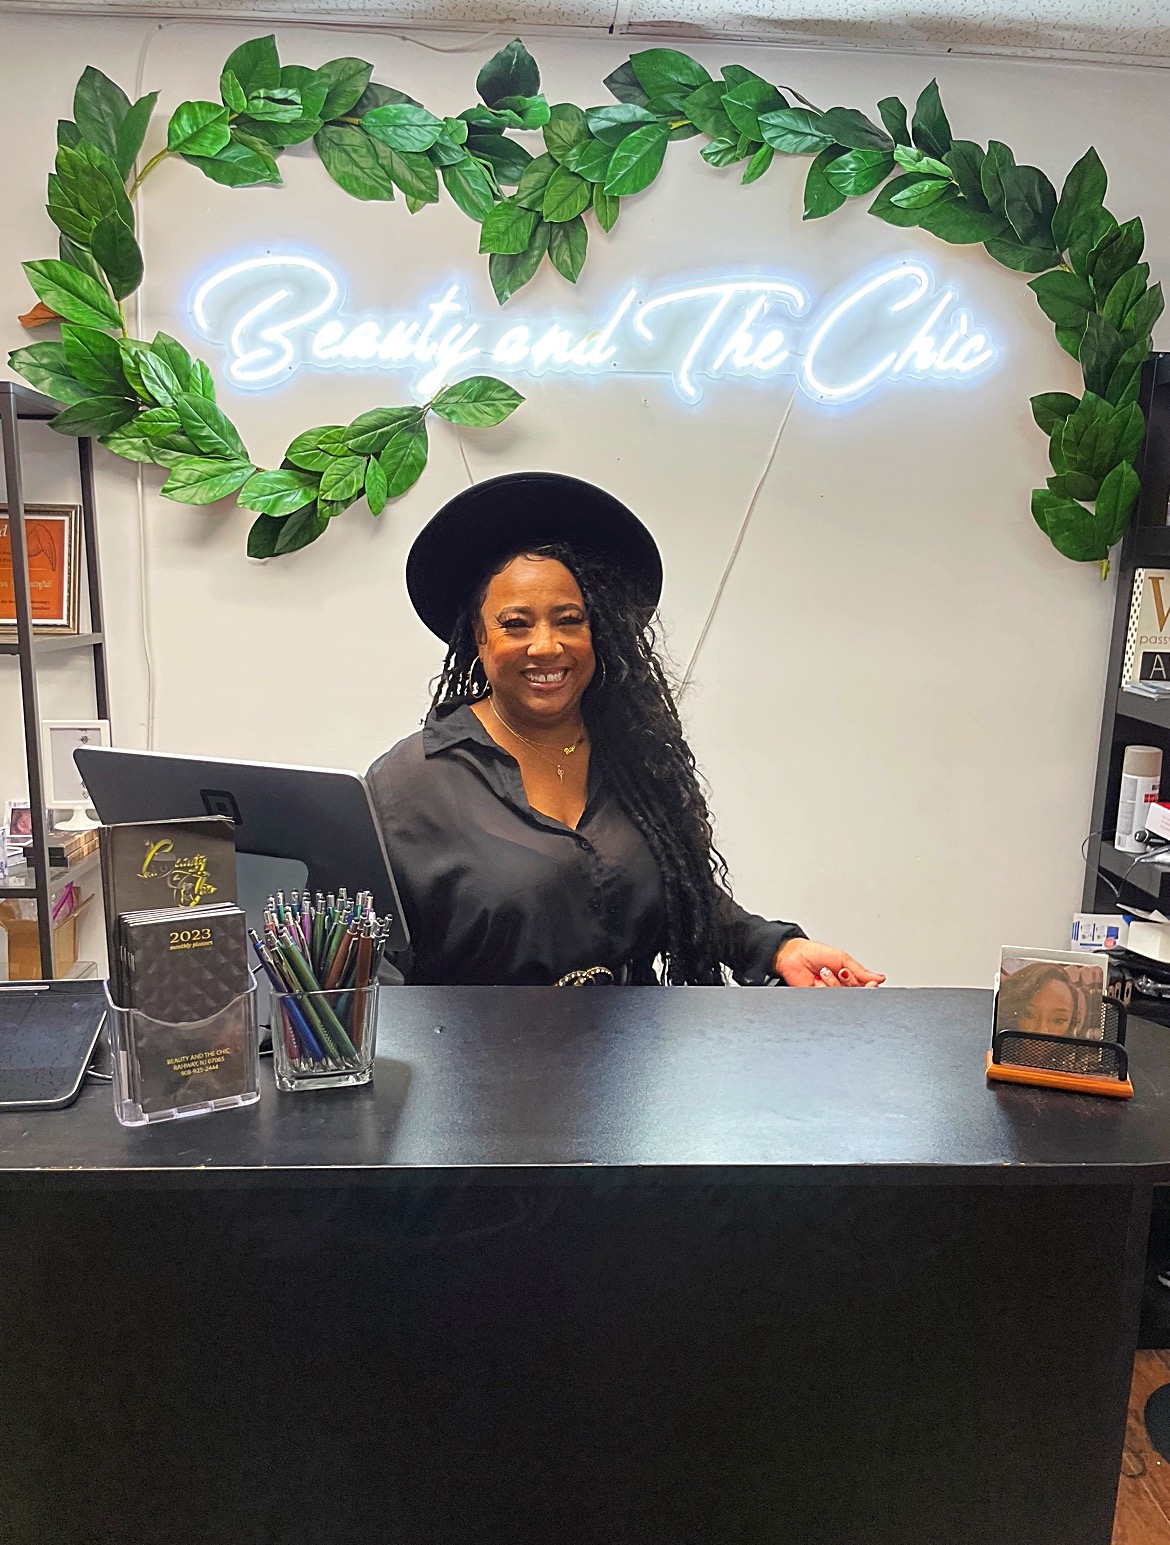 Front desk of Beauty and The Chic. Owner Chyreise Lambert stands behind the desk with a neon sign behind her that states the name of the business.